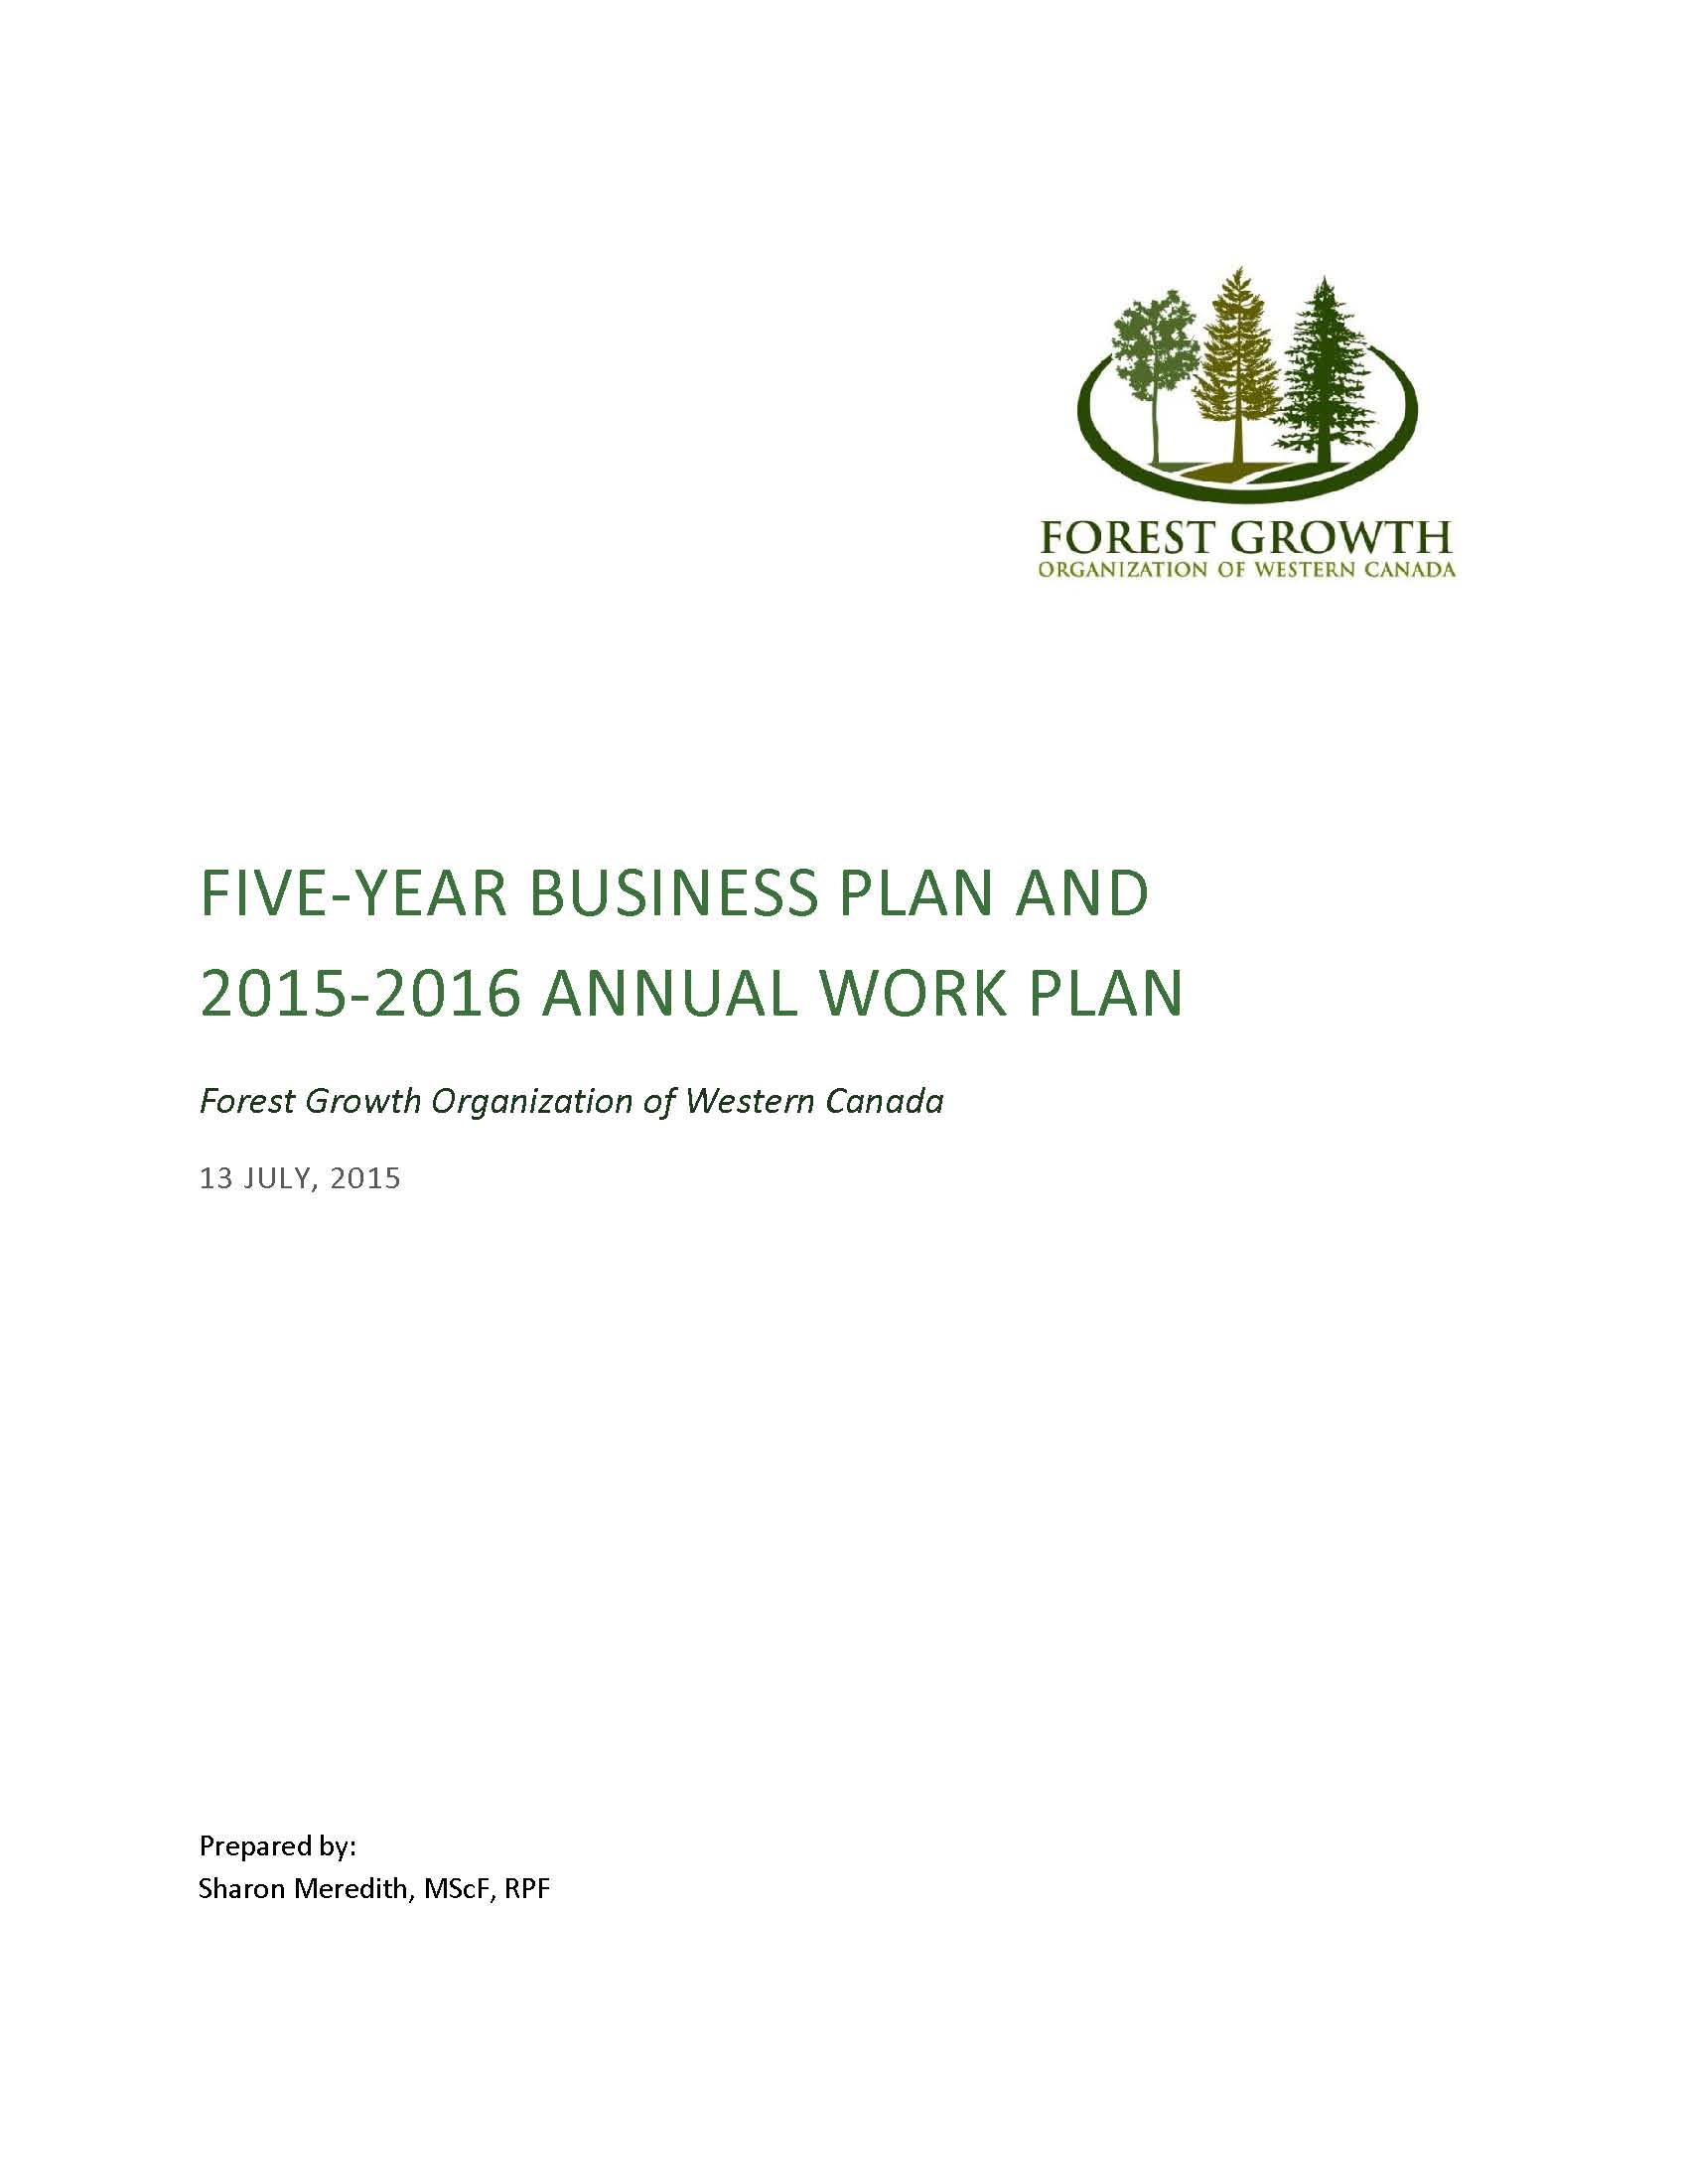 FGrOW five-year business plan and 2015-16 annual work plan